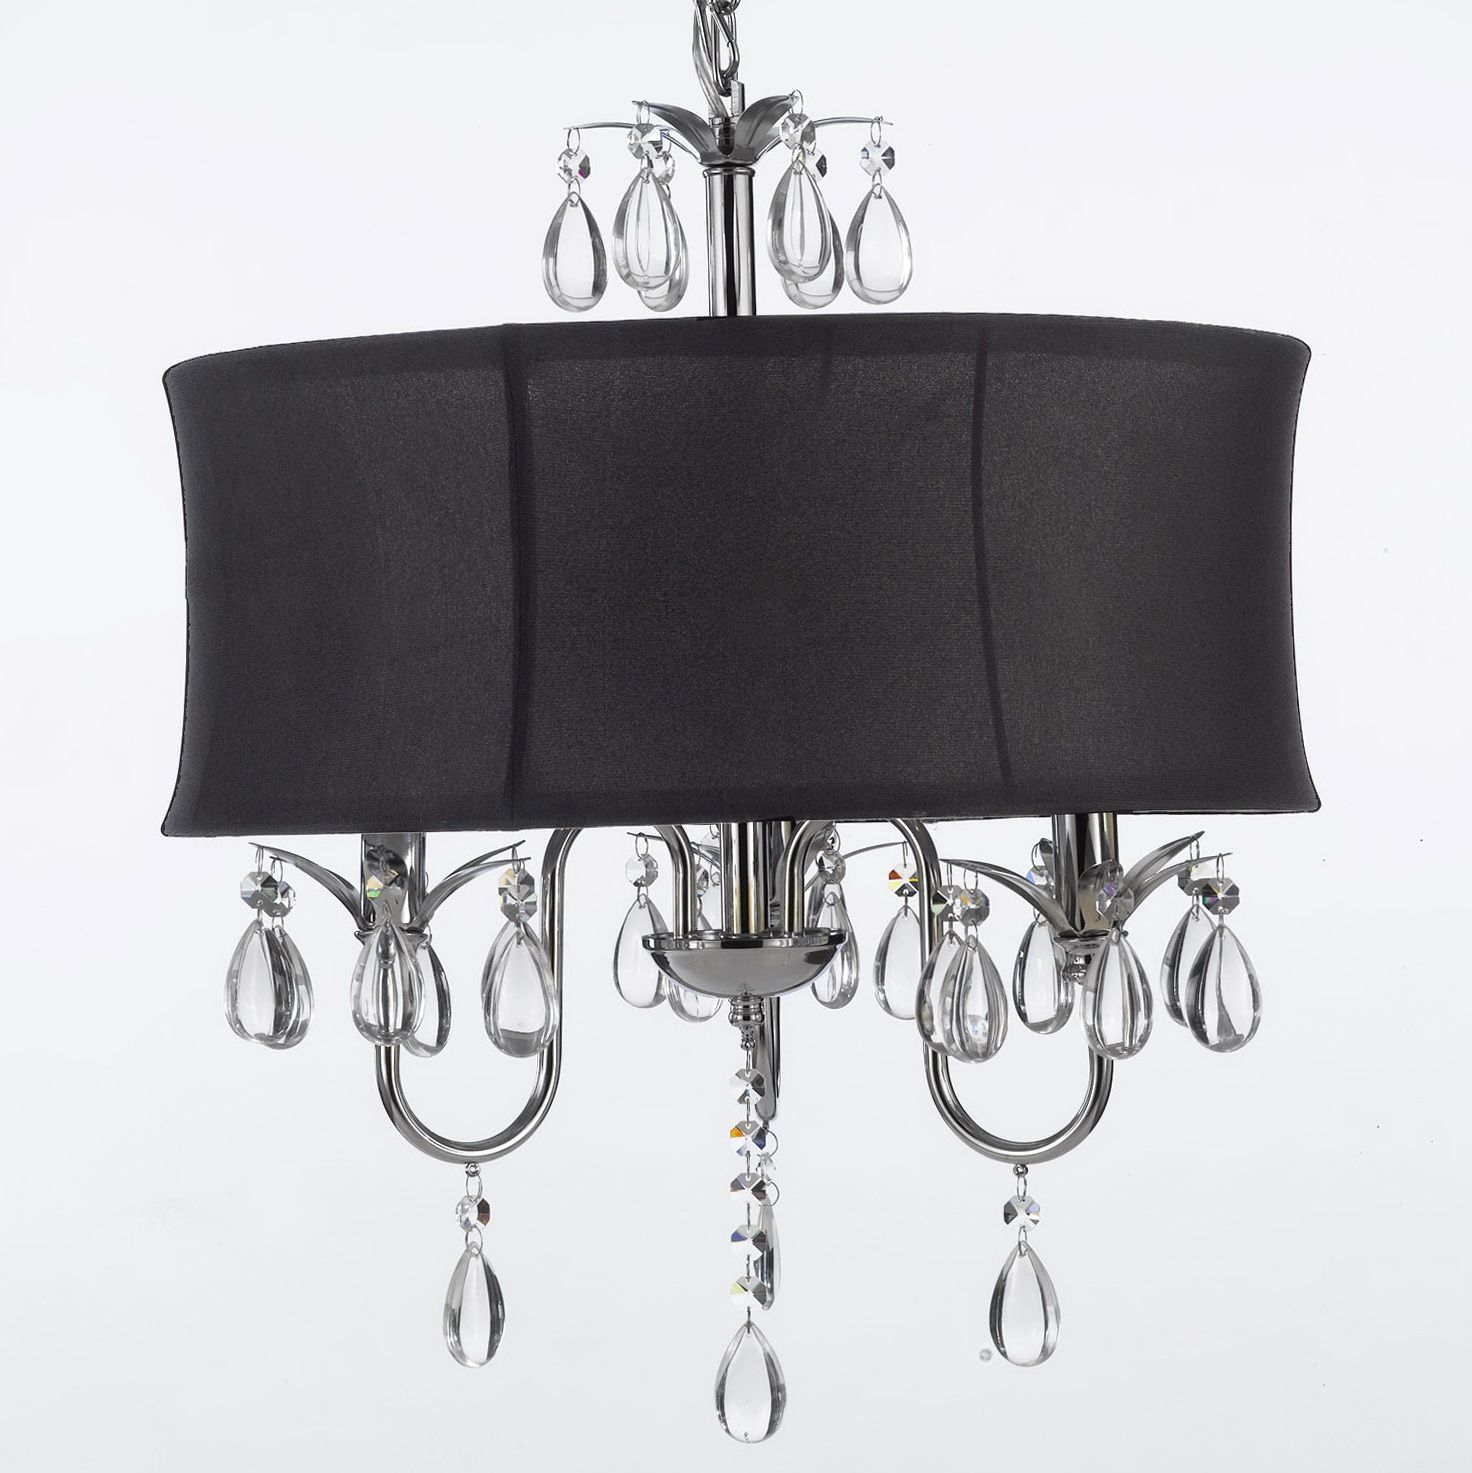 Chandelier With Black Drum Shade | Home Design Ideas Pertaining To Black Shade Chandeliers (View 3 of 15)